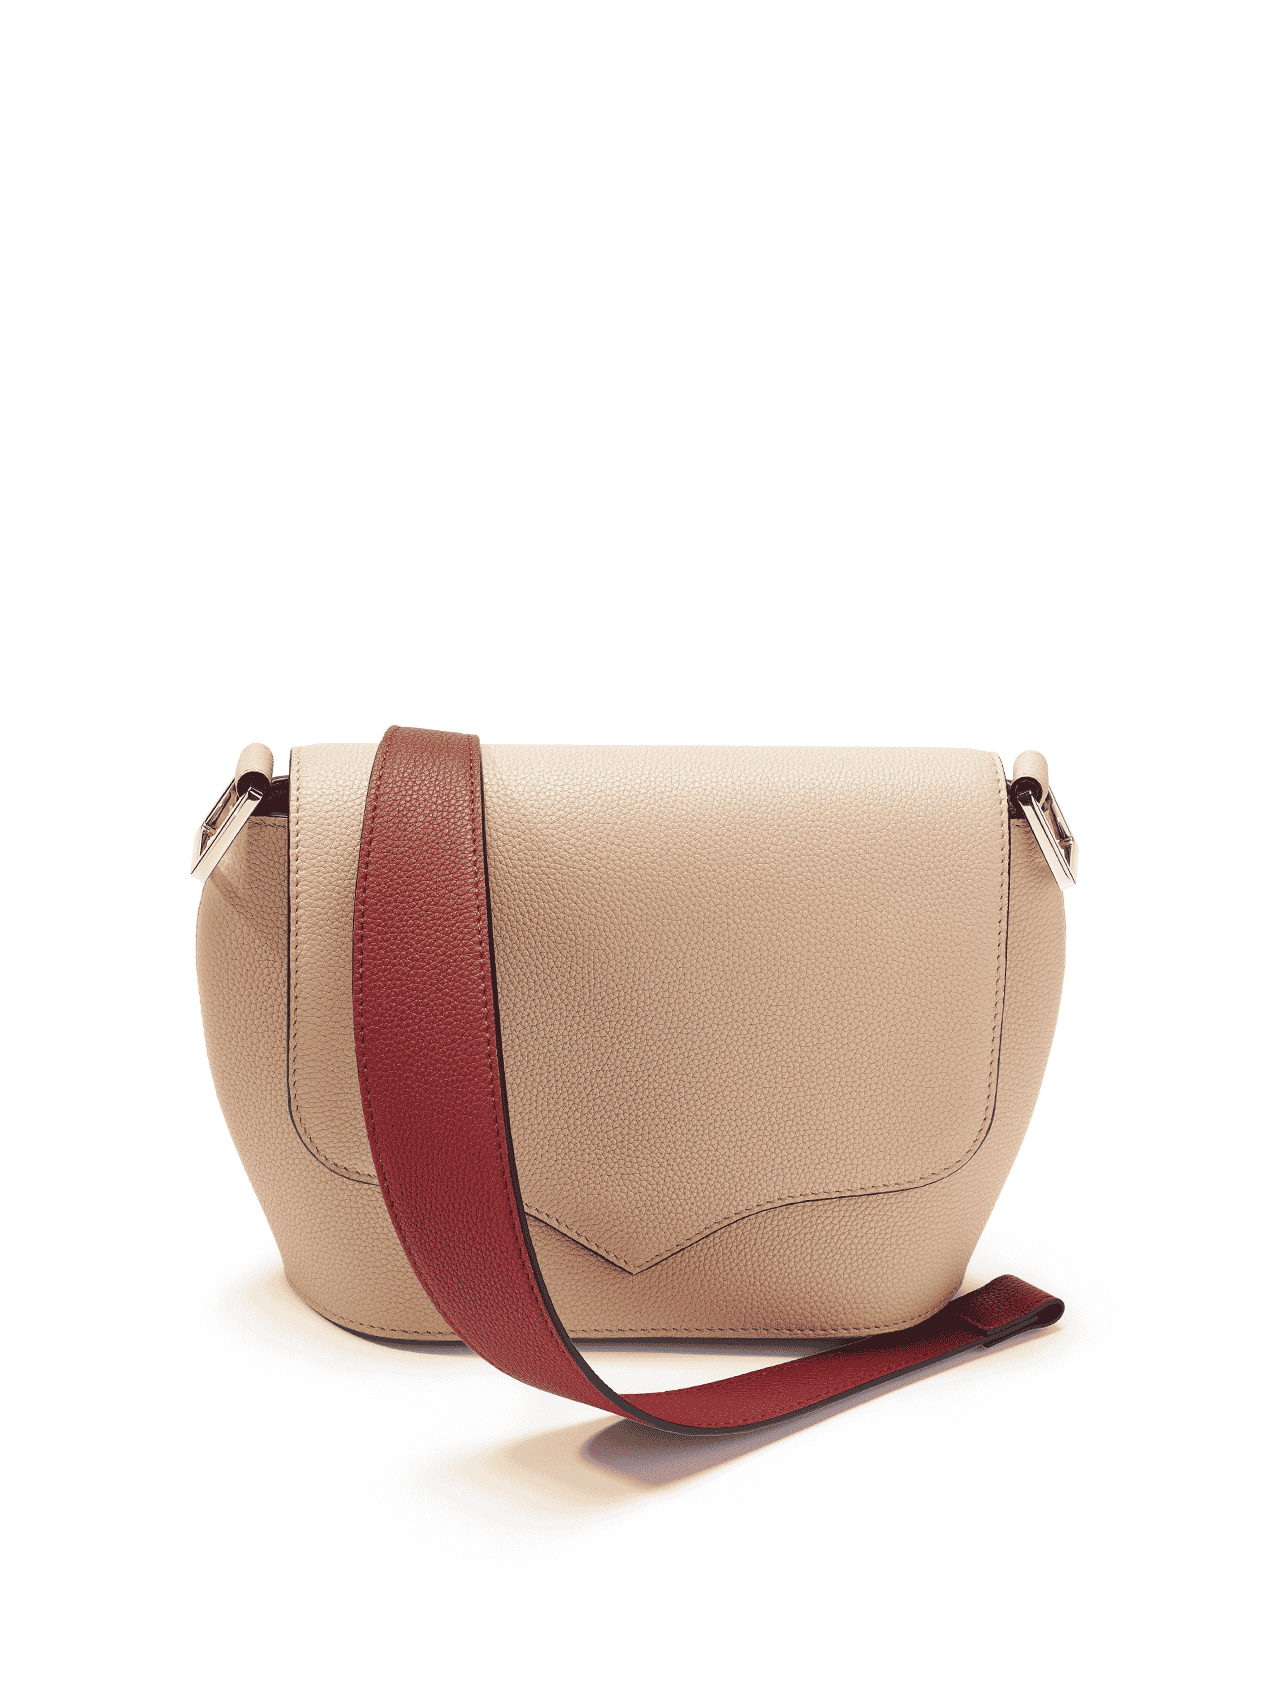 bag leather jean rousseau brown red beige